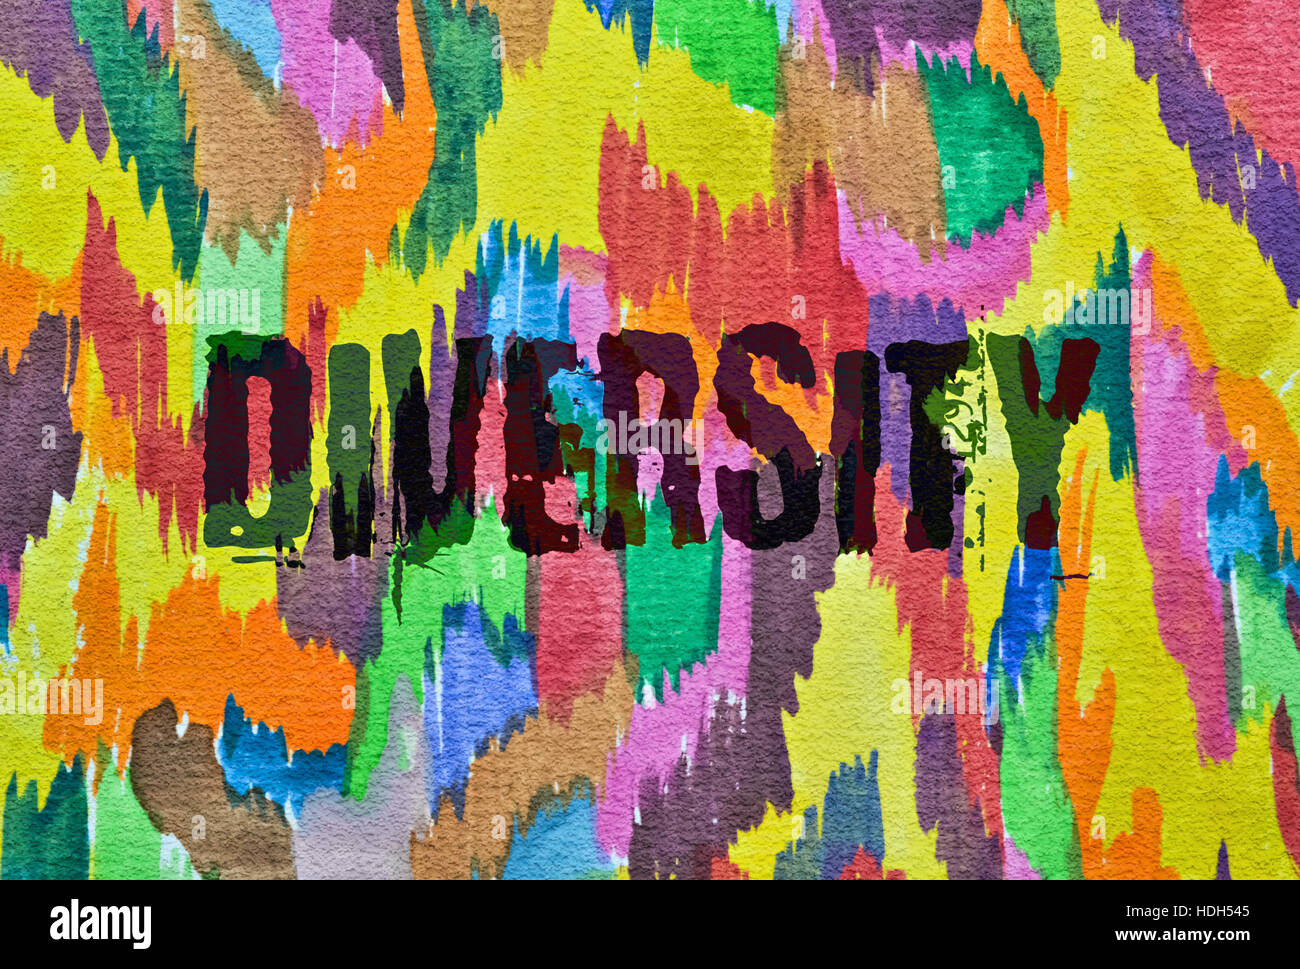 Word Diversity written on colorful abstract background Stock Photo